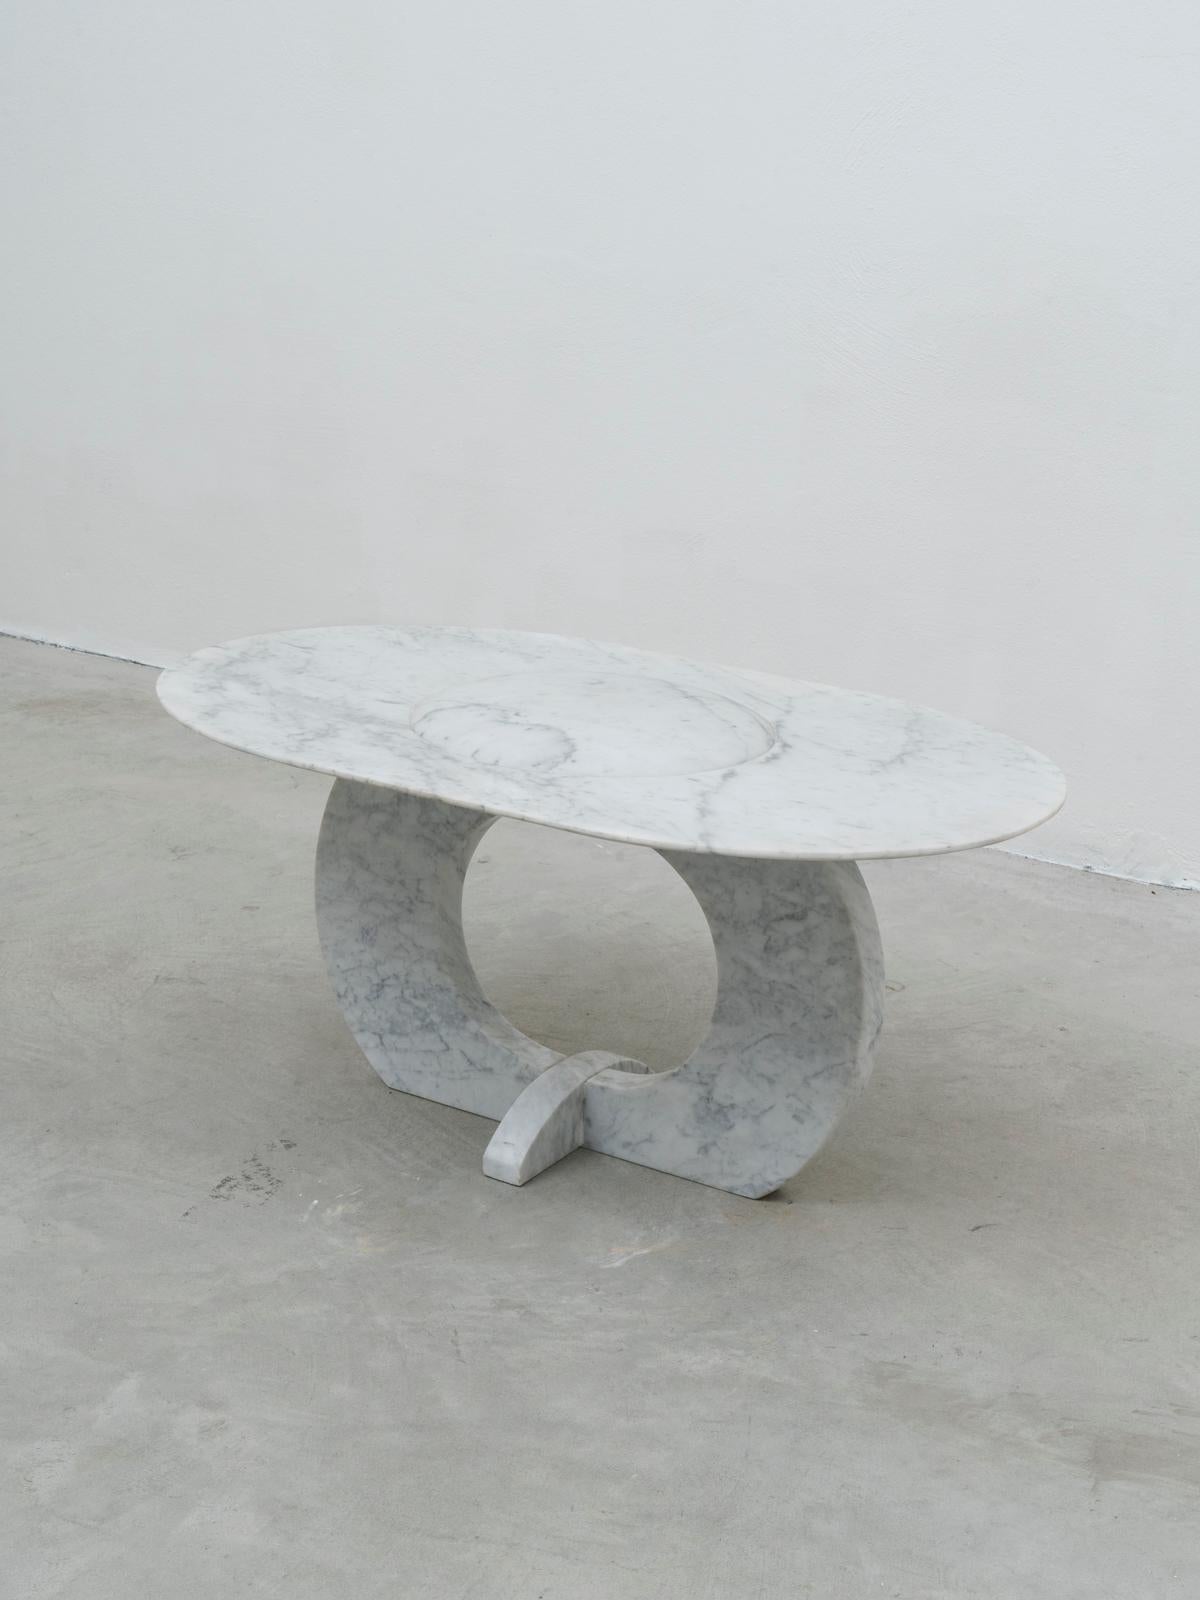 This coffee table is an unique piece by British artist Will West, living and working in Pavia, Italy. It is made of solid white Carrara marble.
This piece was exhibited during Milan Design Week 2019 in 1+1's space at Alcova. 
During his career